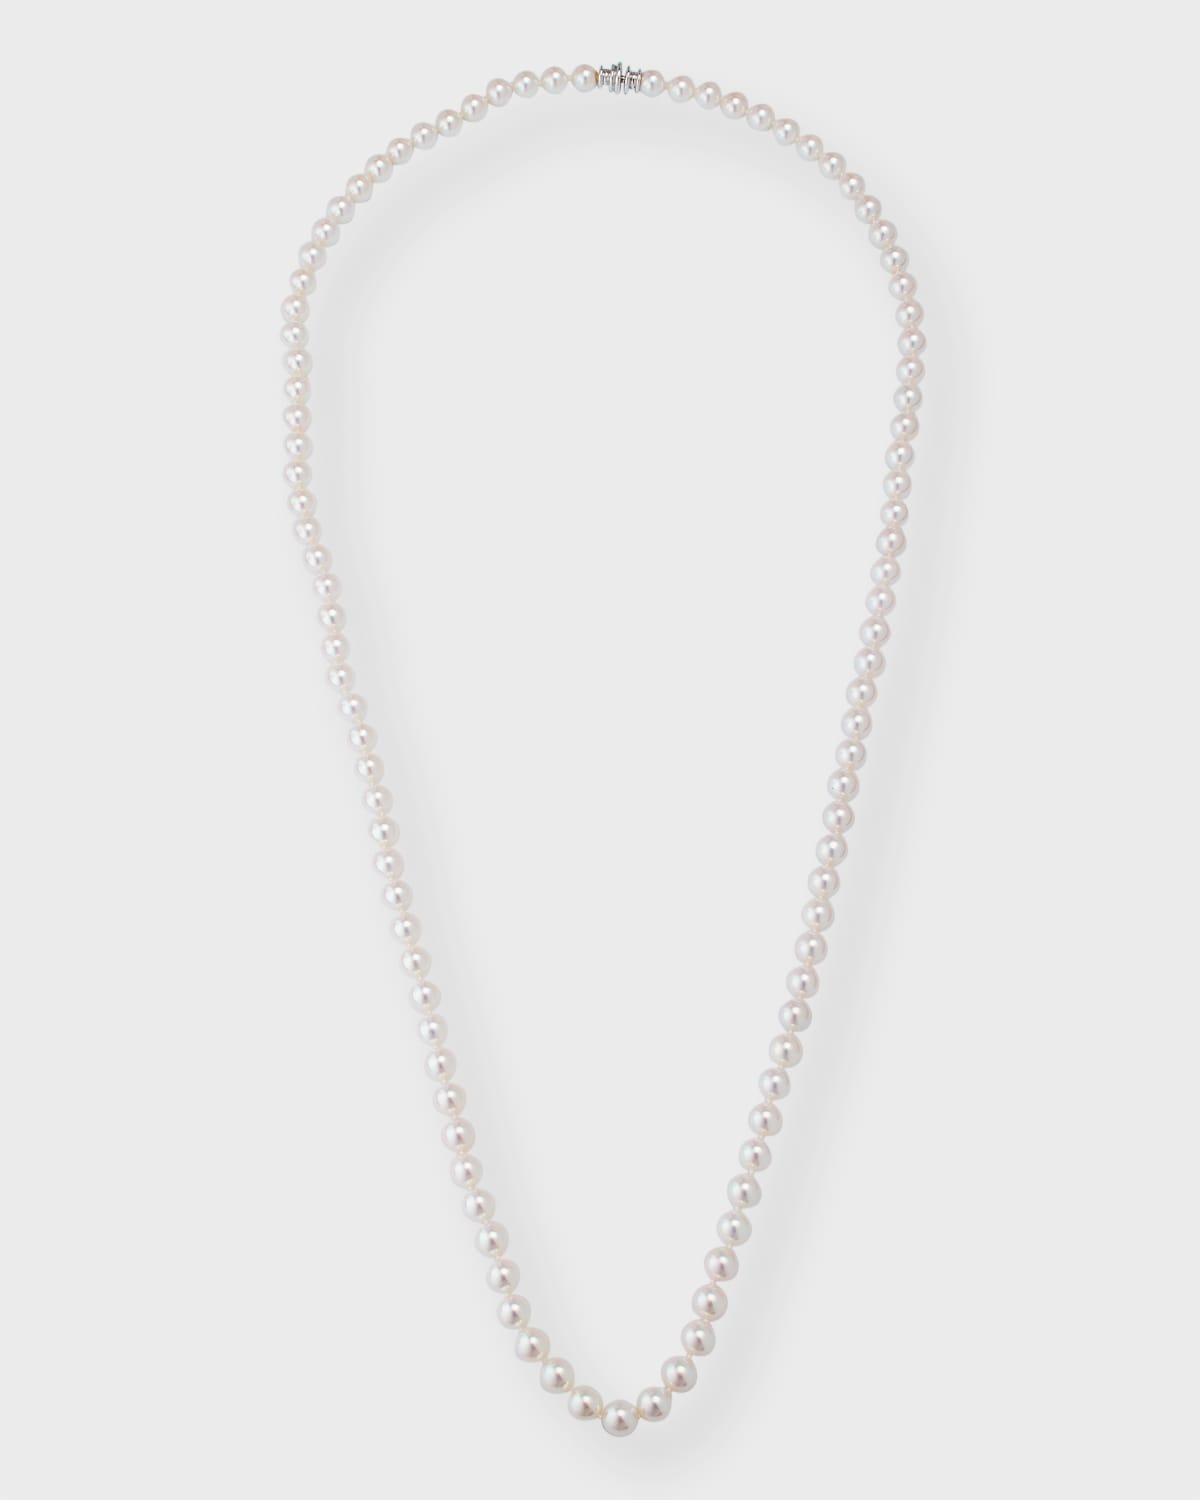 Assael Akoya Pearl Long Necklace With 18k White Gold Clasp, 32"l In Metallic